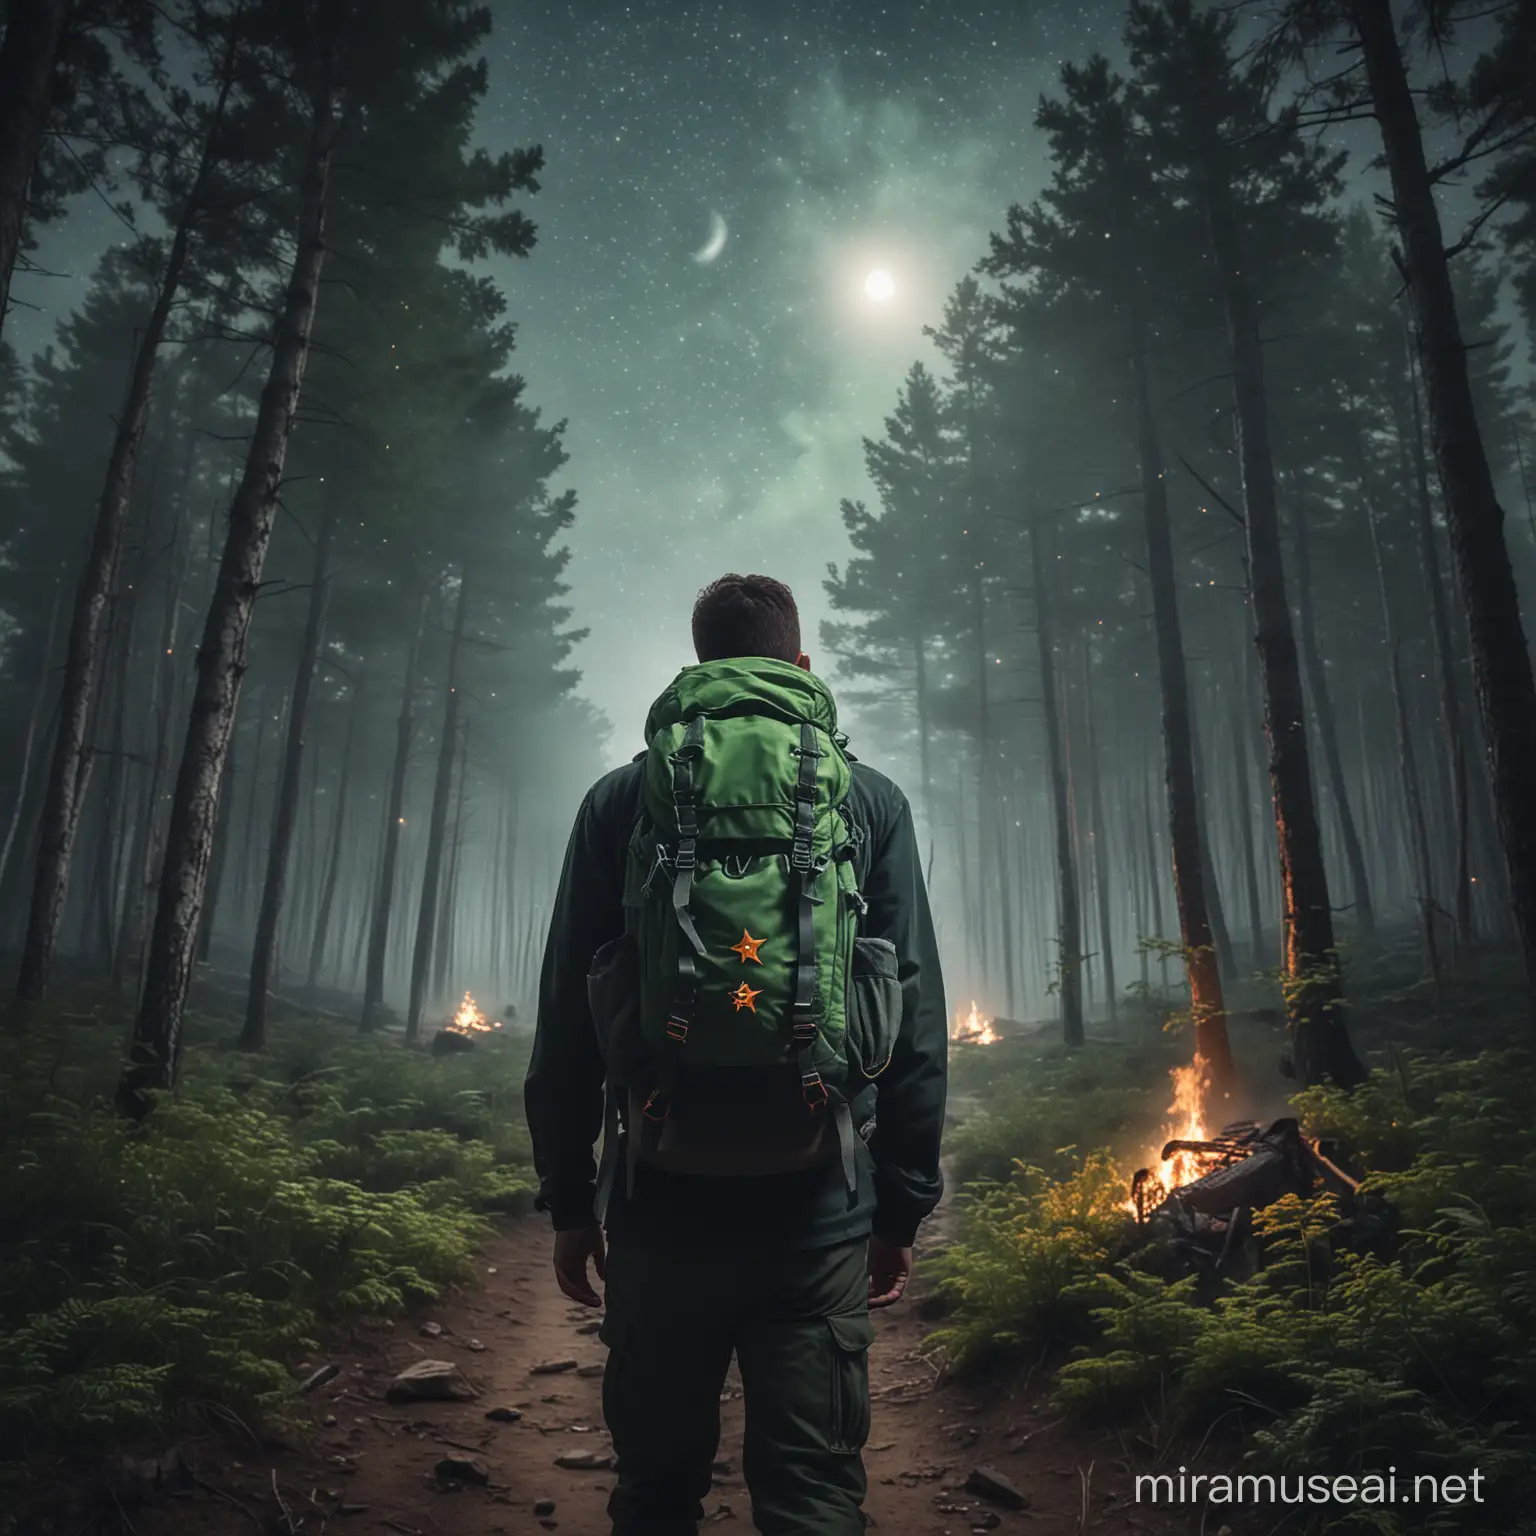 man with green hike backpack in the forest. fire, stars and moon
 